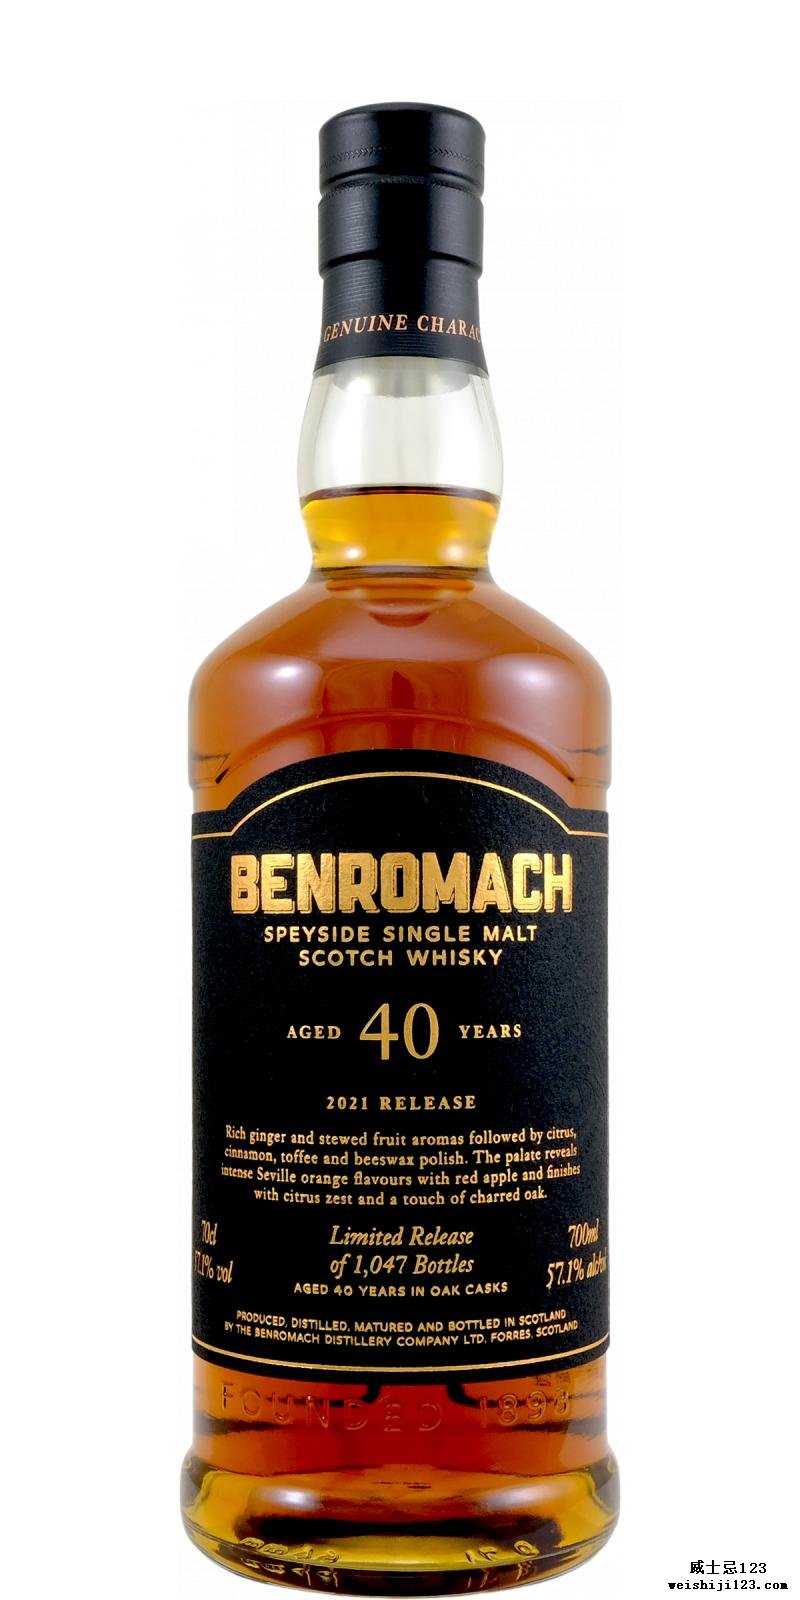 Benromach 40-year-old